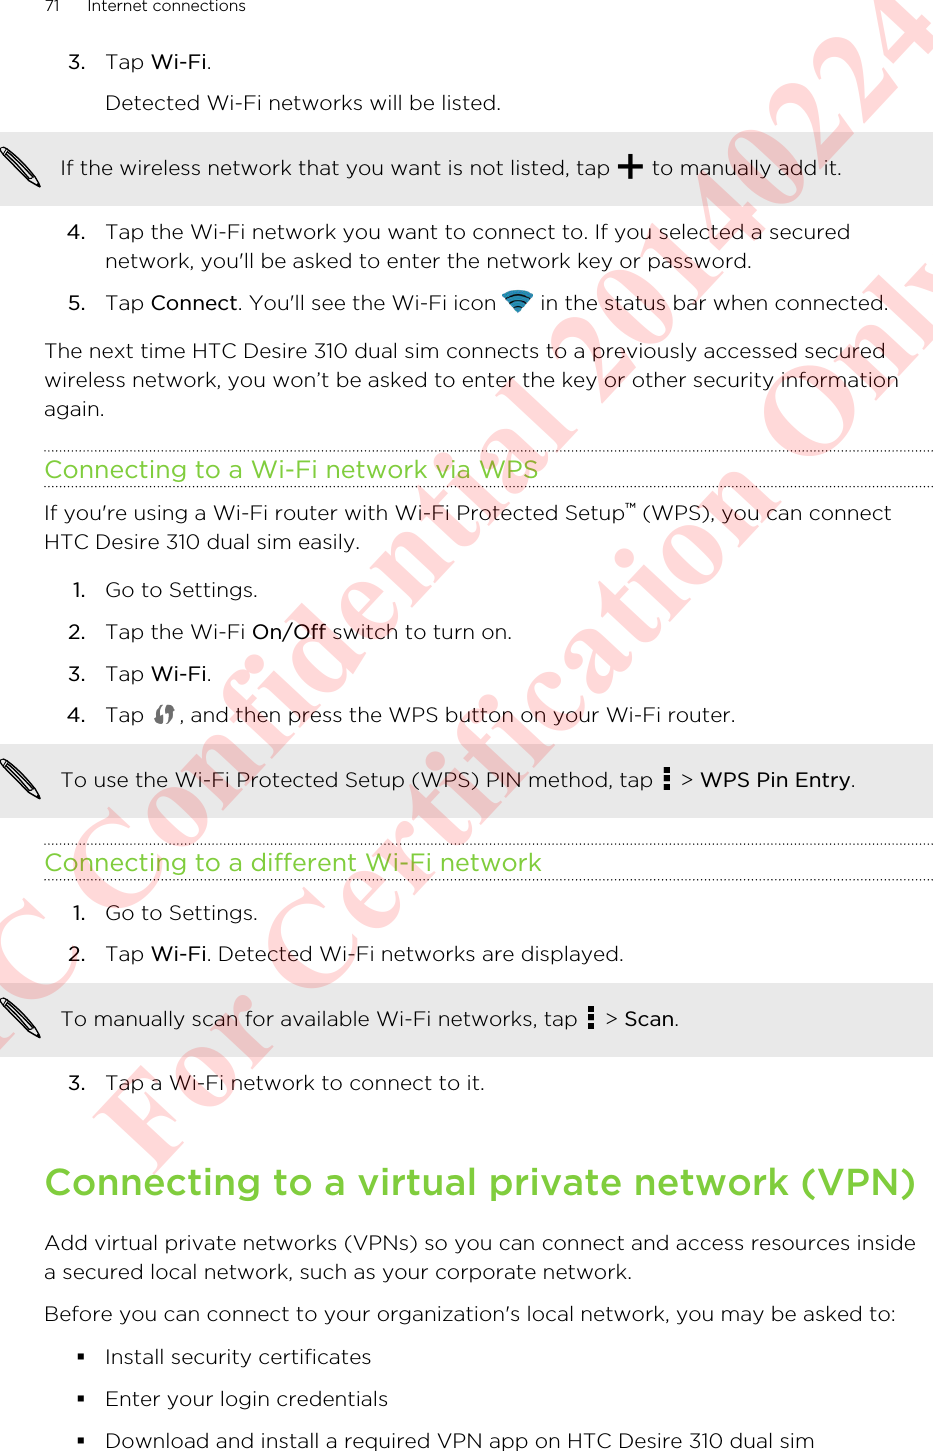 3. Tap Wi-Fi. Detected Wi-Fi networks will be listed.If the wireless network that you want is not listed, tap   to manually add it.4. Tap the Wi-Fi network you want to connect to. If you selected a securednetwork, you&apos;ll be asked to enter the network key or password.5. Tap Connect. You&apos;ll see the Wi-Fi icon   in the status bar when connected.The next time HTC Desire 310 dual sim connects to a previously accessed securedwireless network, you won’t be asked to enter the key or other security informationagain.Connecting to a Wi-Fi network via WPSIf you&apos;re using a Wi-Fi router with Wi-Fi Protected Setup™ (WPS), you can connectHTC Desire 310 dual sim easily.1. Go to Settings.2. Tap the Wi-Fi On/Off switch to turn on.3. Tap Wi-Fi.4. Tap  , and then press the WPS button on your Wi-Fi router. To use the Wi-Fi Protected Setup (WPS) PIN method, tap   &gt; WPS Pin Entry.Connecting to a different Wi-Fi network1. Go to Settings.2. Tap Wi-Fi. Detected Wi-Fi networks are displayed.To manually scan for available Wi-Fi networks, tap   &gt; Scan.3. Tap a Wi-Fi network to connect to it.Connecting to a virtual private network (VPN)Add virtual private networks (VPNs) so you can connect and access resources insidea secured local network, such as your corporate network.Before you can connect to your organization&apos;s local network, you may be asked to:§Install security certificates§Enter your login credentials§Download and install a required VPN app on HTC Desire 310 dual sim71 Internet connectionsHTC Confidential 20140224 For Certification Only